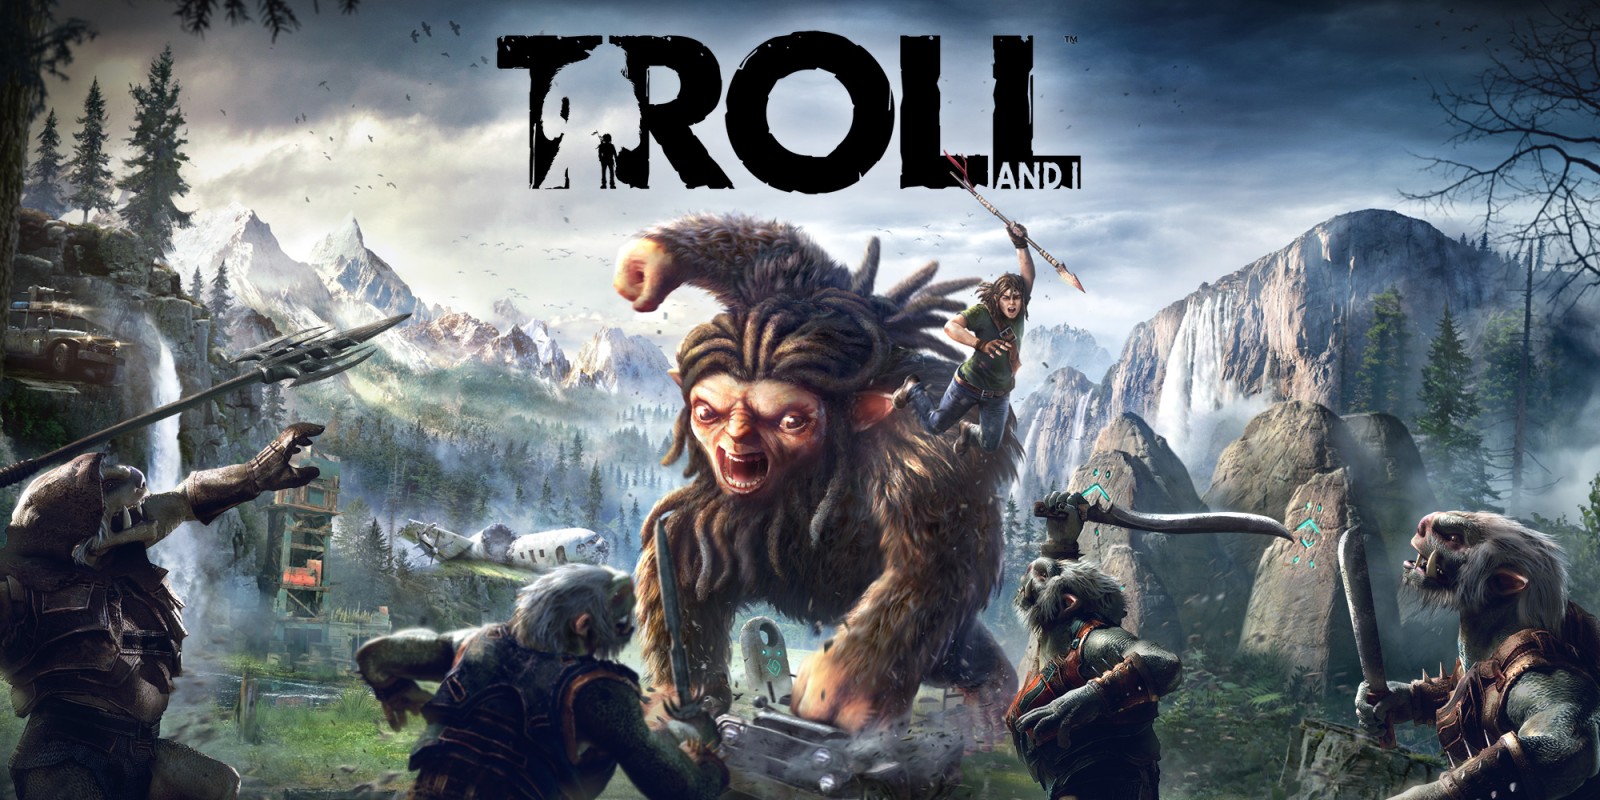 Troll and I™ | Nintendo Switch download software | Games | Nintendo1600 x 800